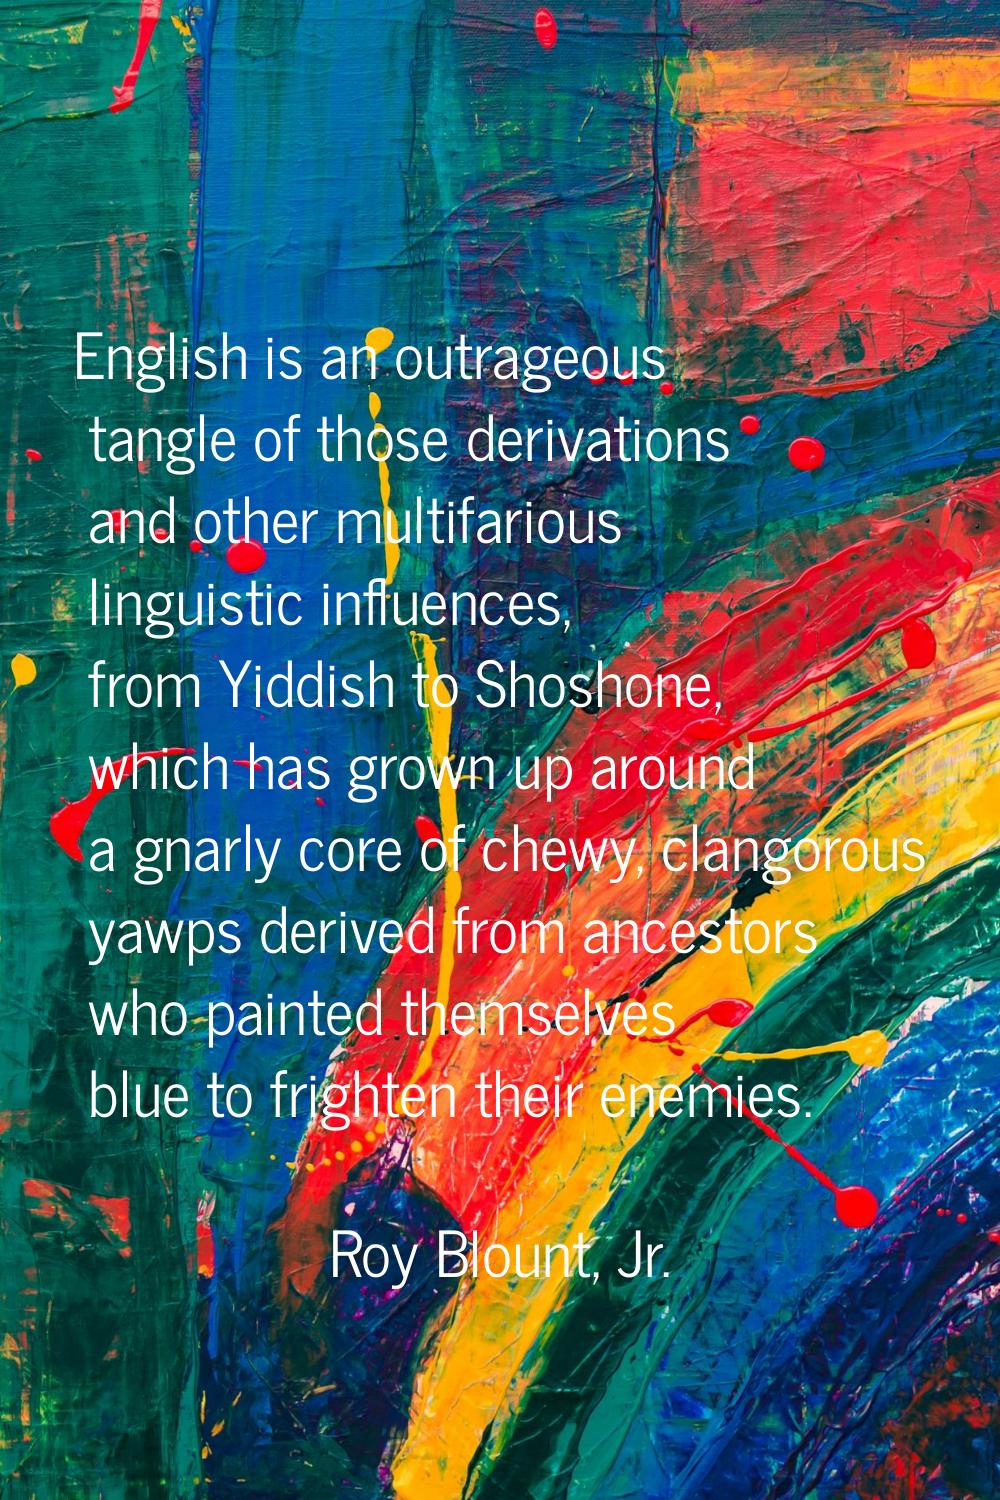 English is an outrageous tangle of those derivations and other multifarious linguistic influences, 